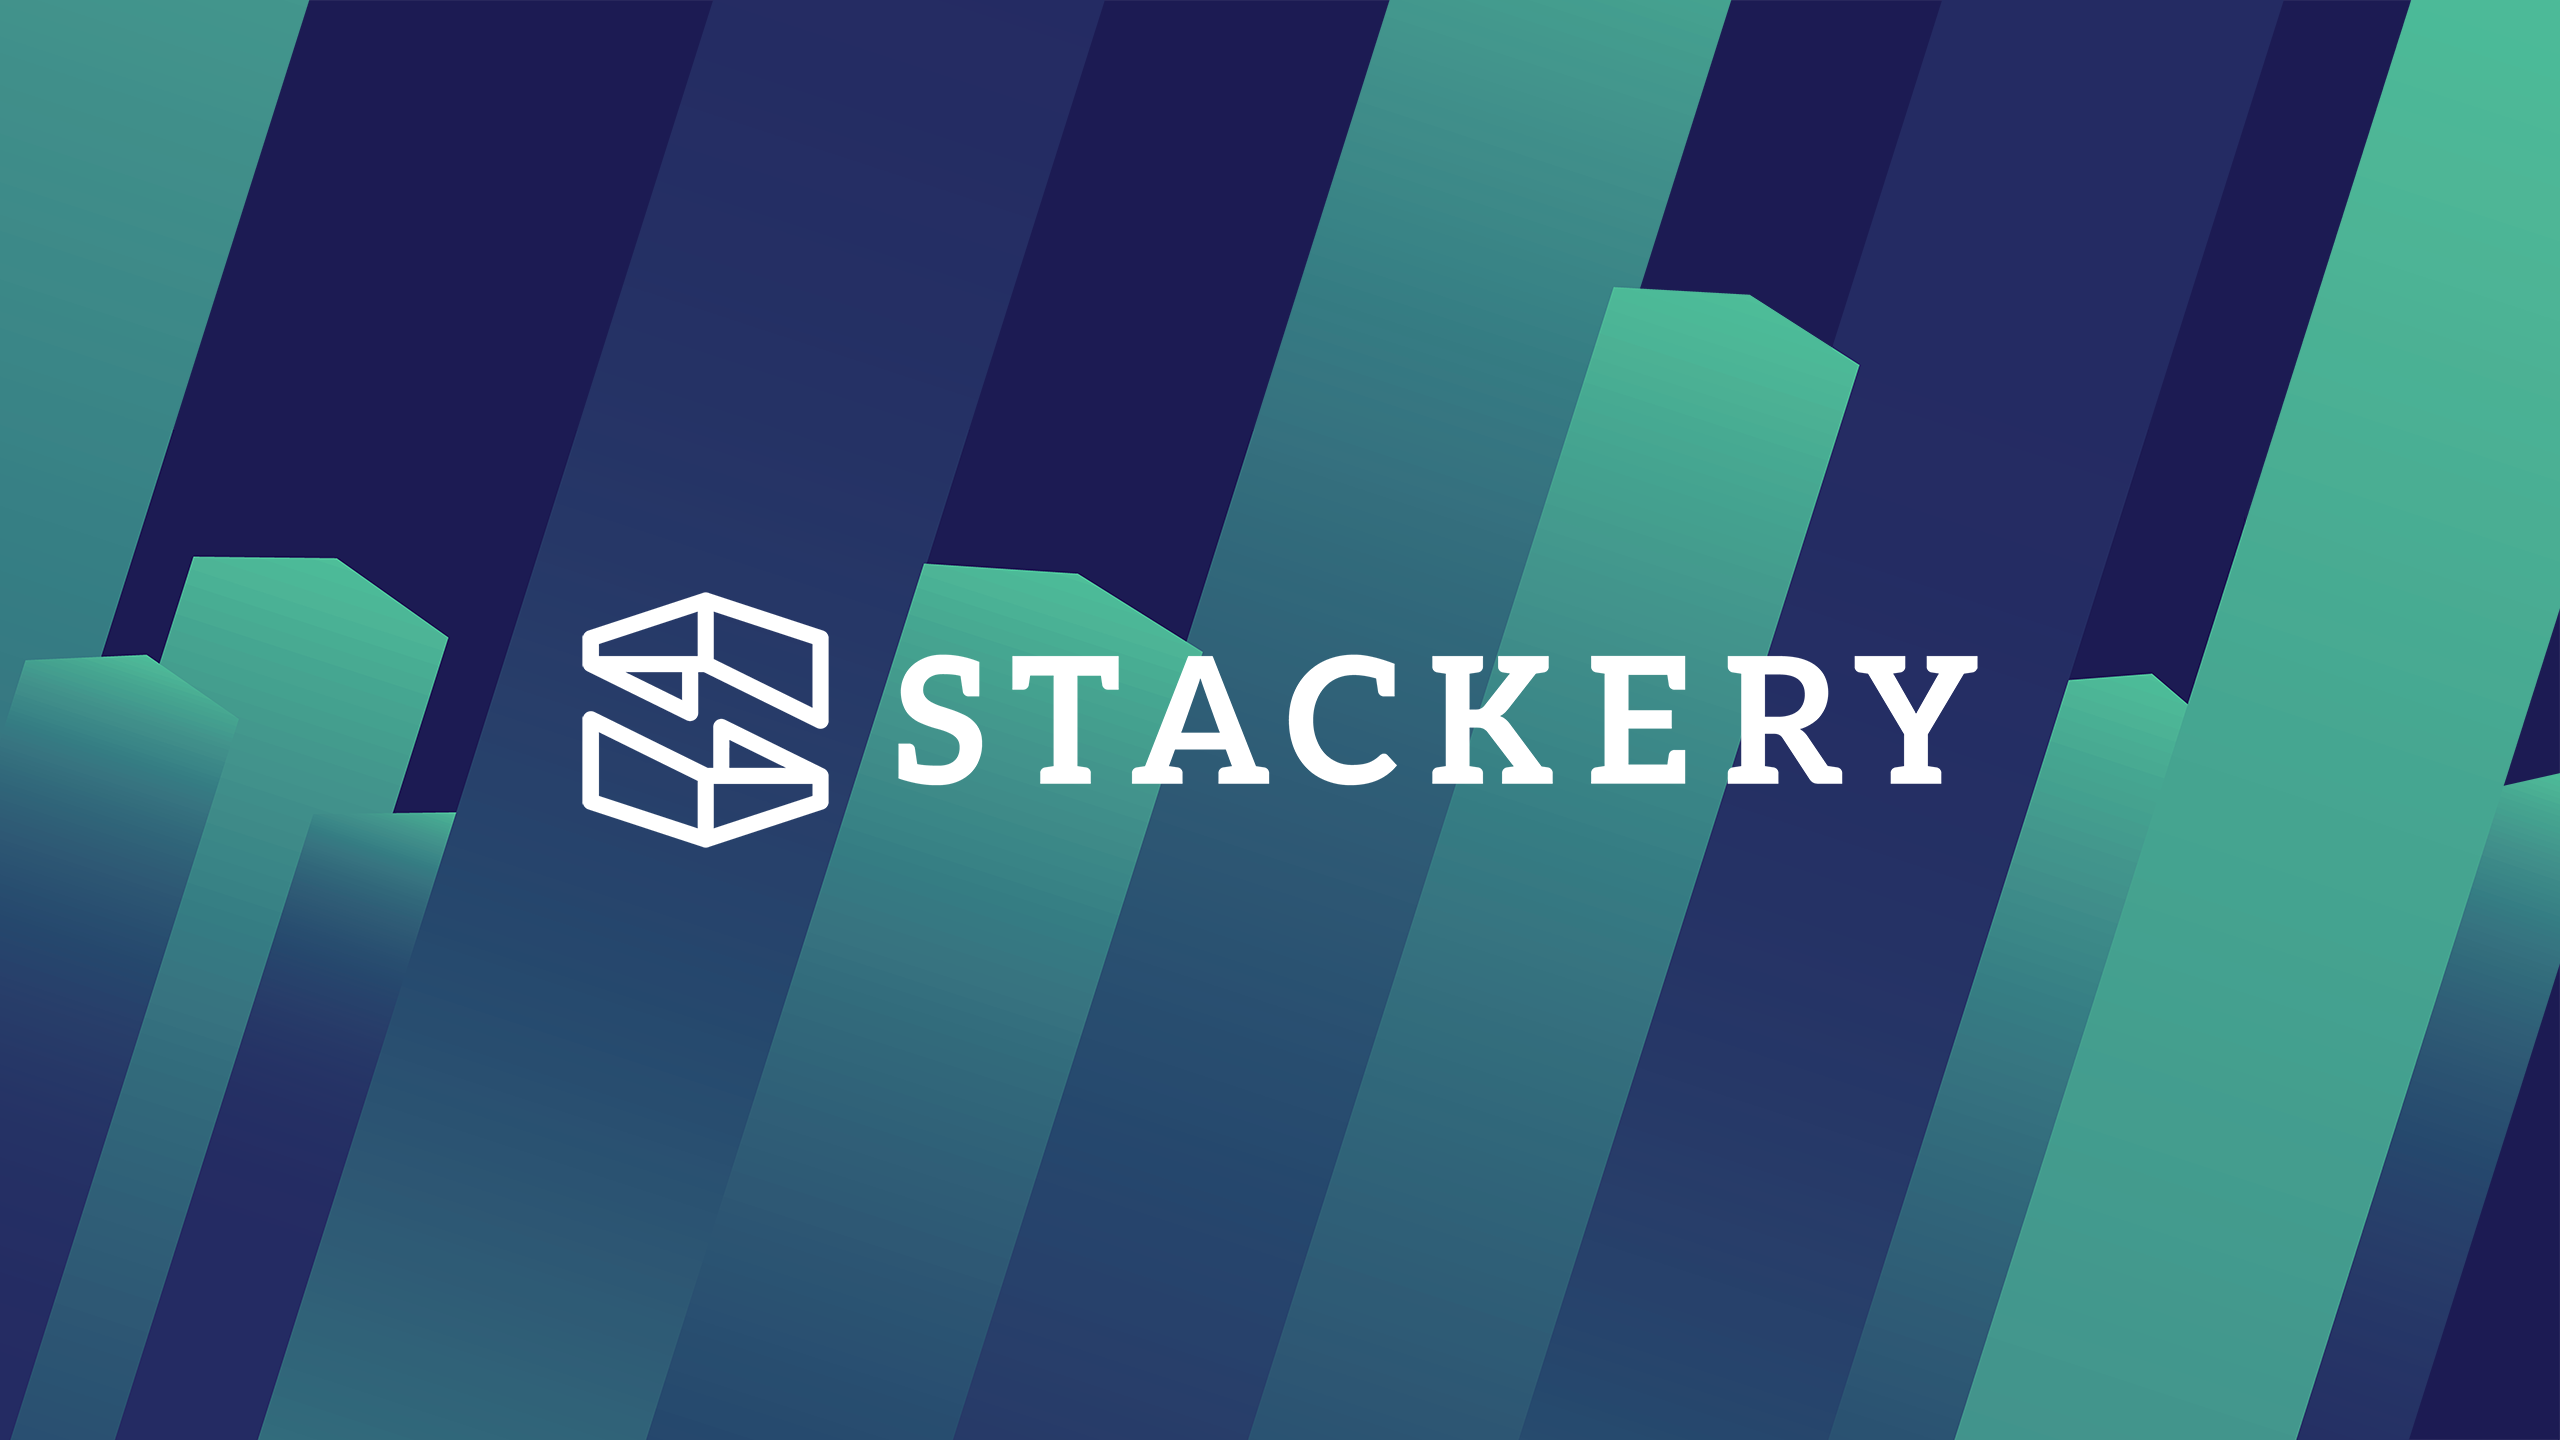 Stackery Welcomes Tim Wagner, Inventor of AWS Lambda, to Board of Directors